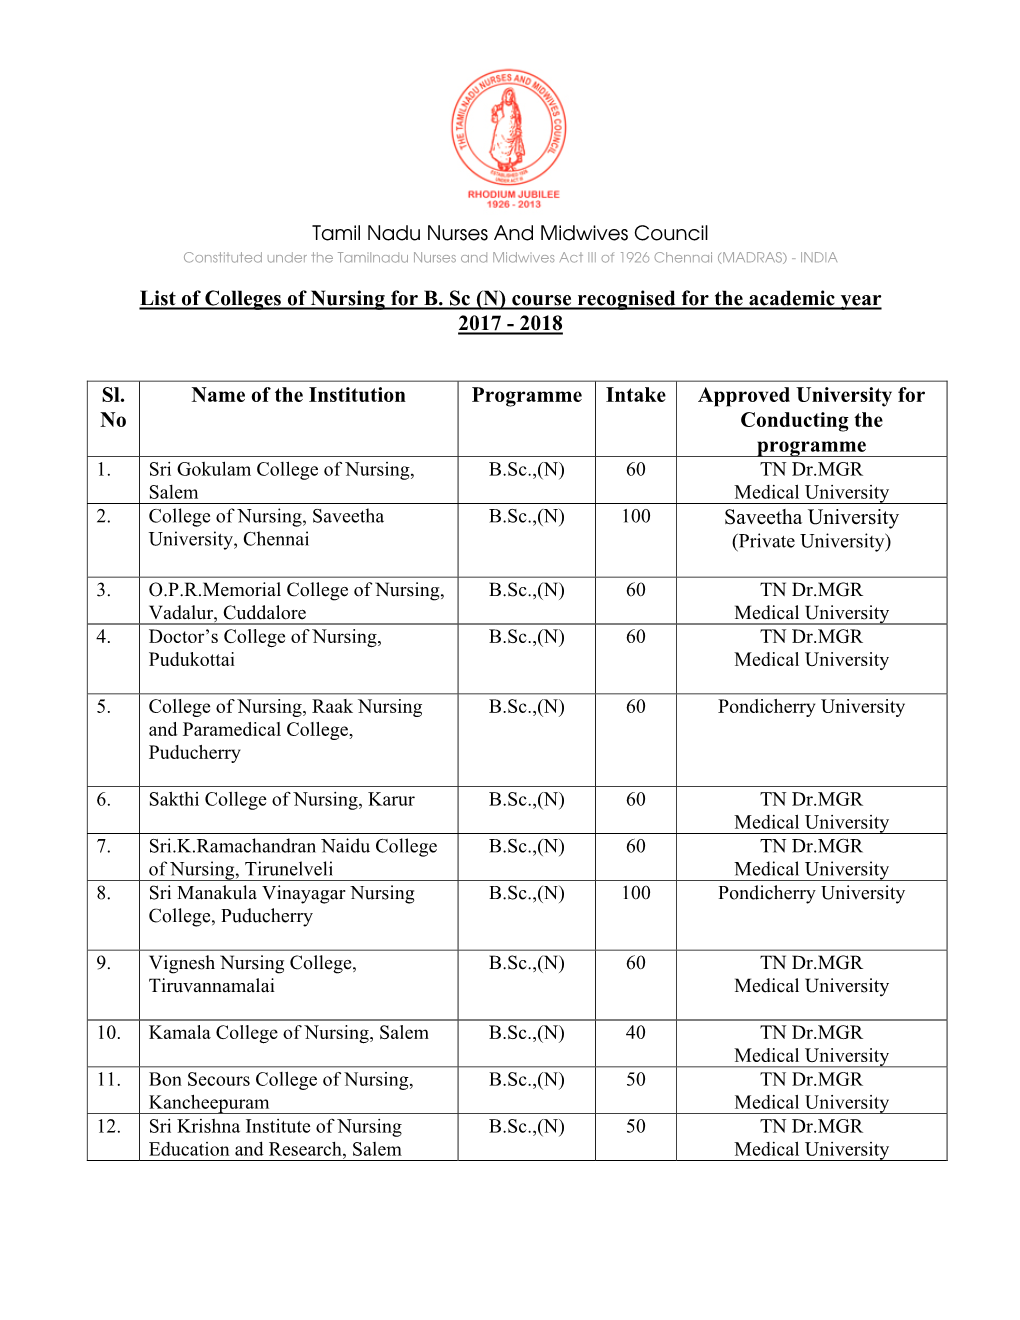 List of Colleges of Nursing for B. Sc (N) Course Recognised for the Academic Year 2017 - 2018